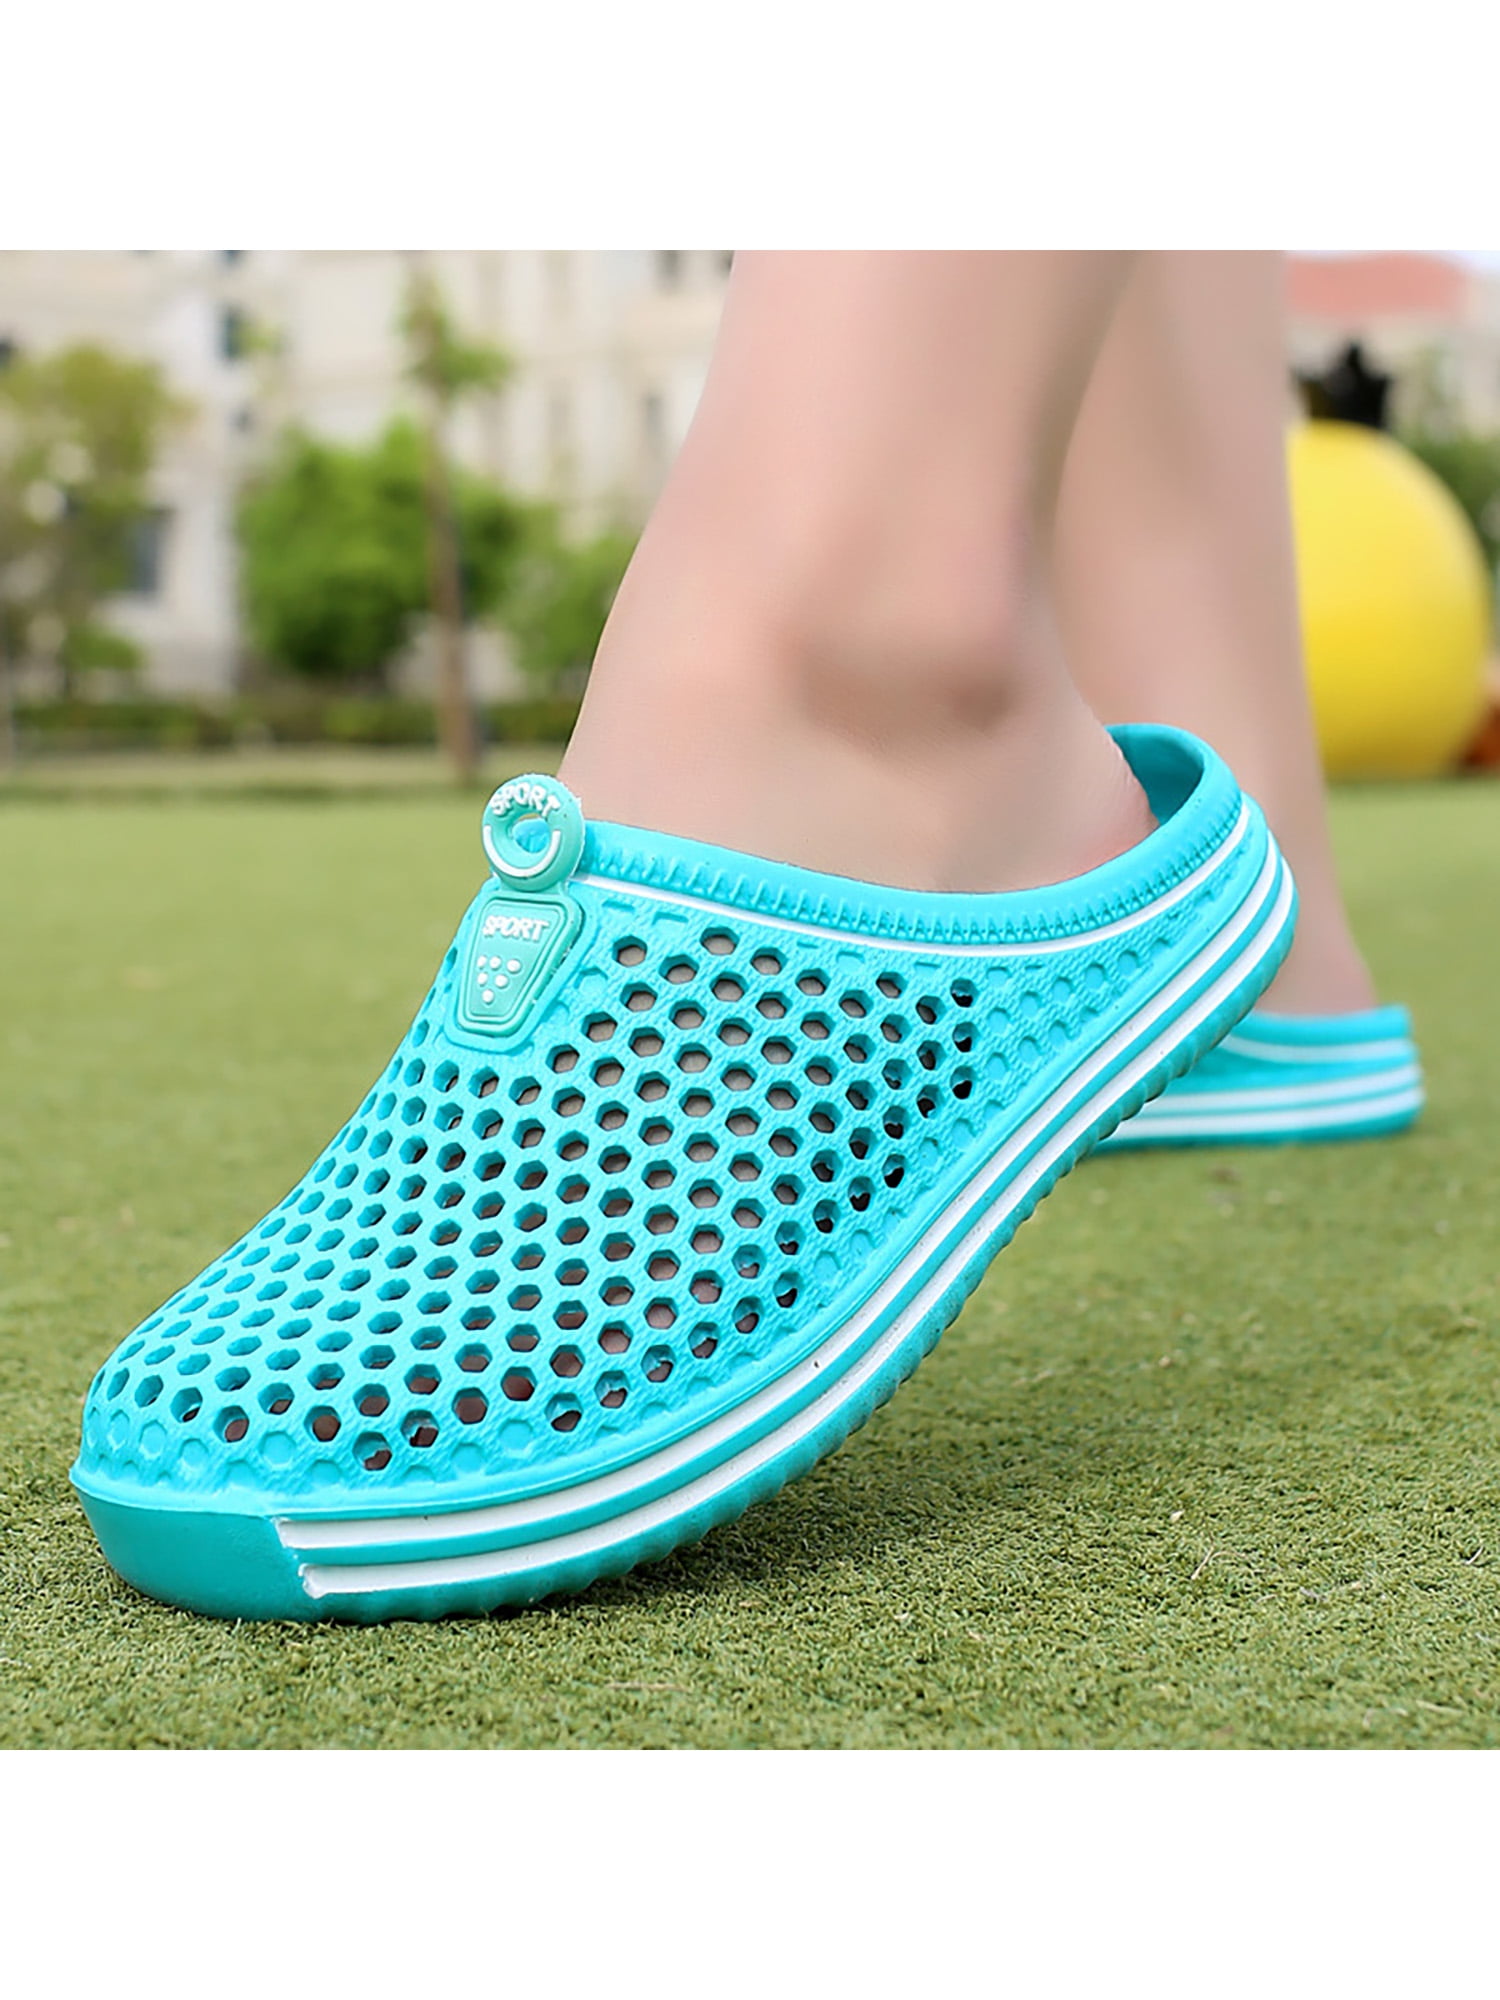 Mens Slipper Fashion Lightweight Garden Clogs Shoes Slippers Sandals Slip-On Hollow Outdoor Casual Shoes for Walking 